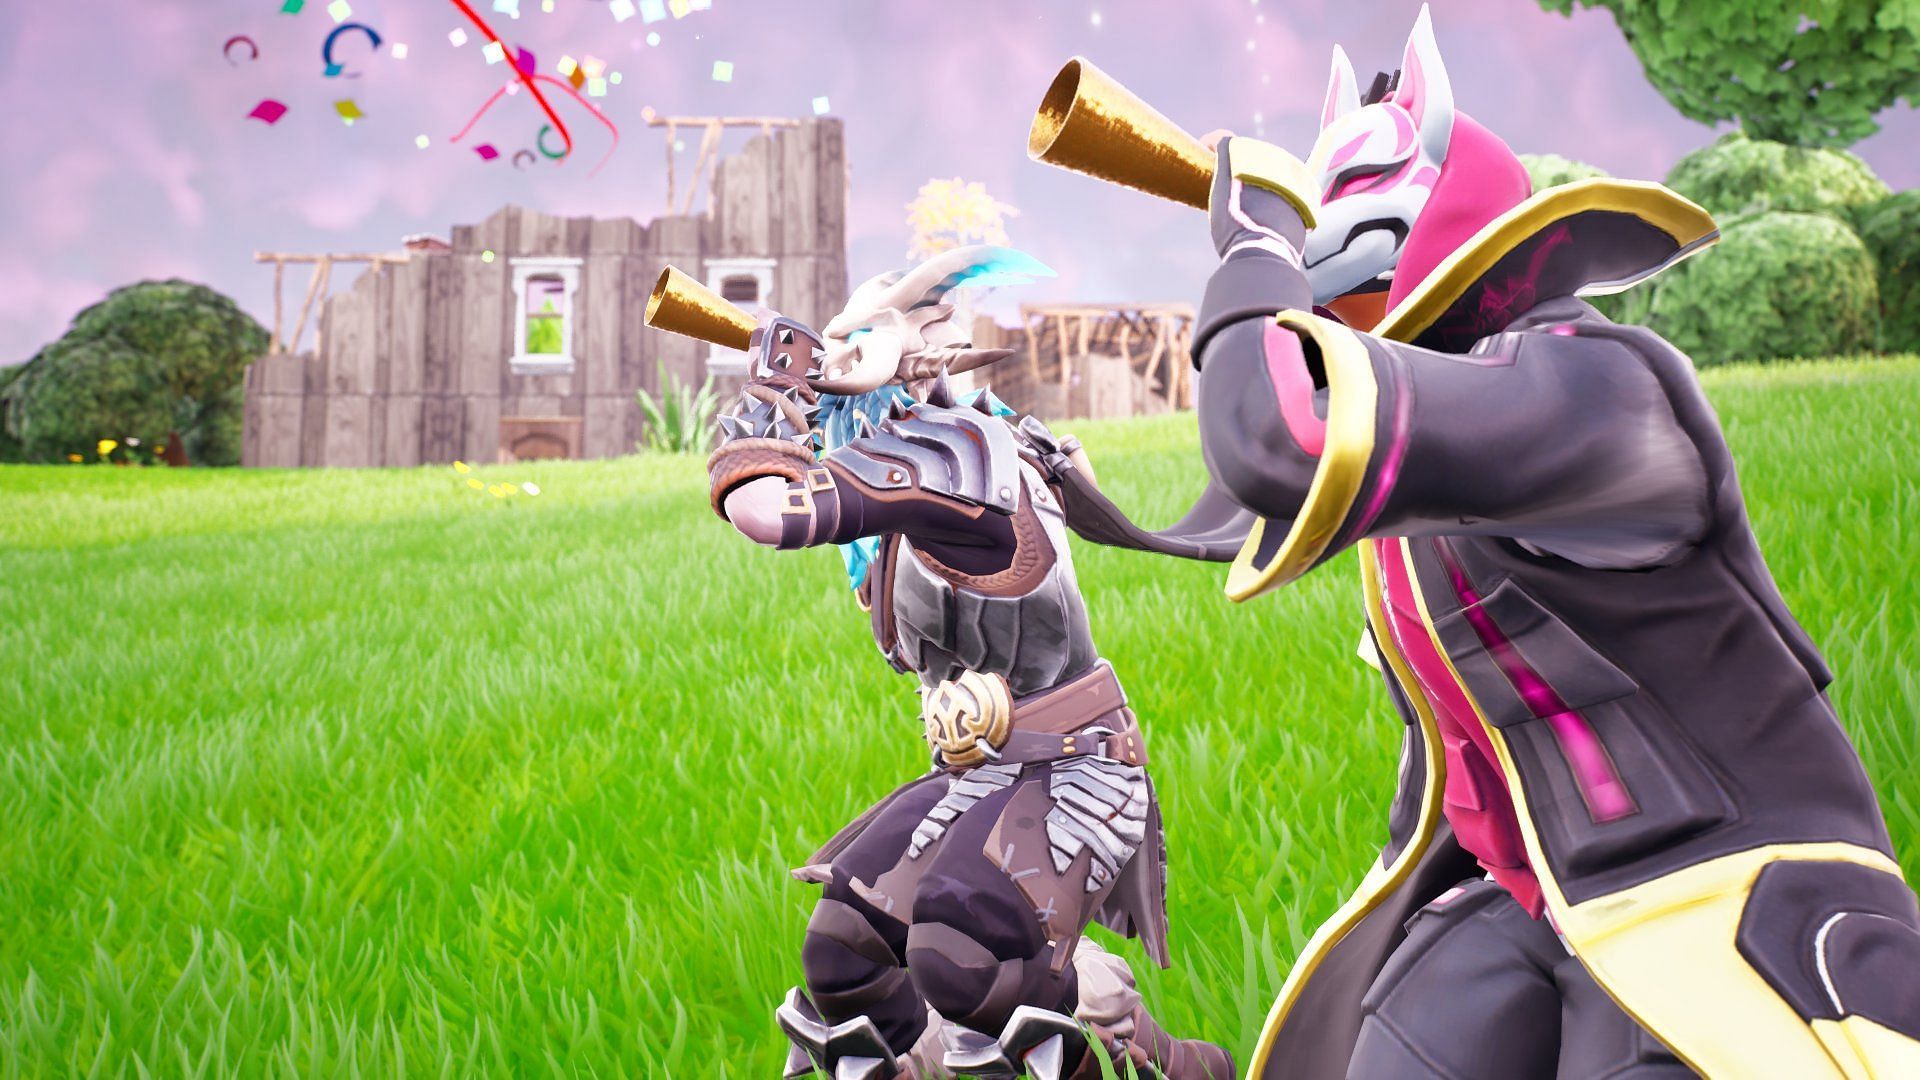 Fortnite' reportedly peaked at over 5 million concurrent players with the  release of OG Fortnite 🎮🤯 This is the largest player count…